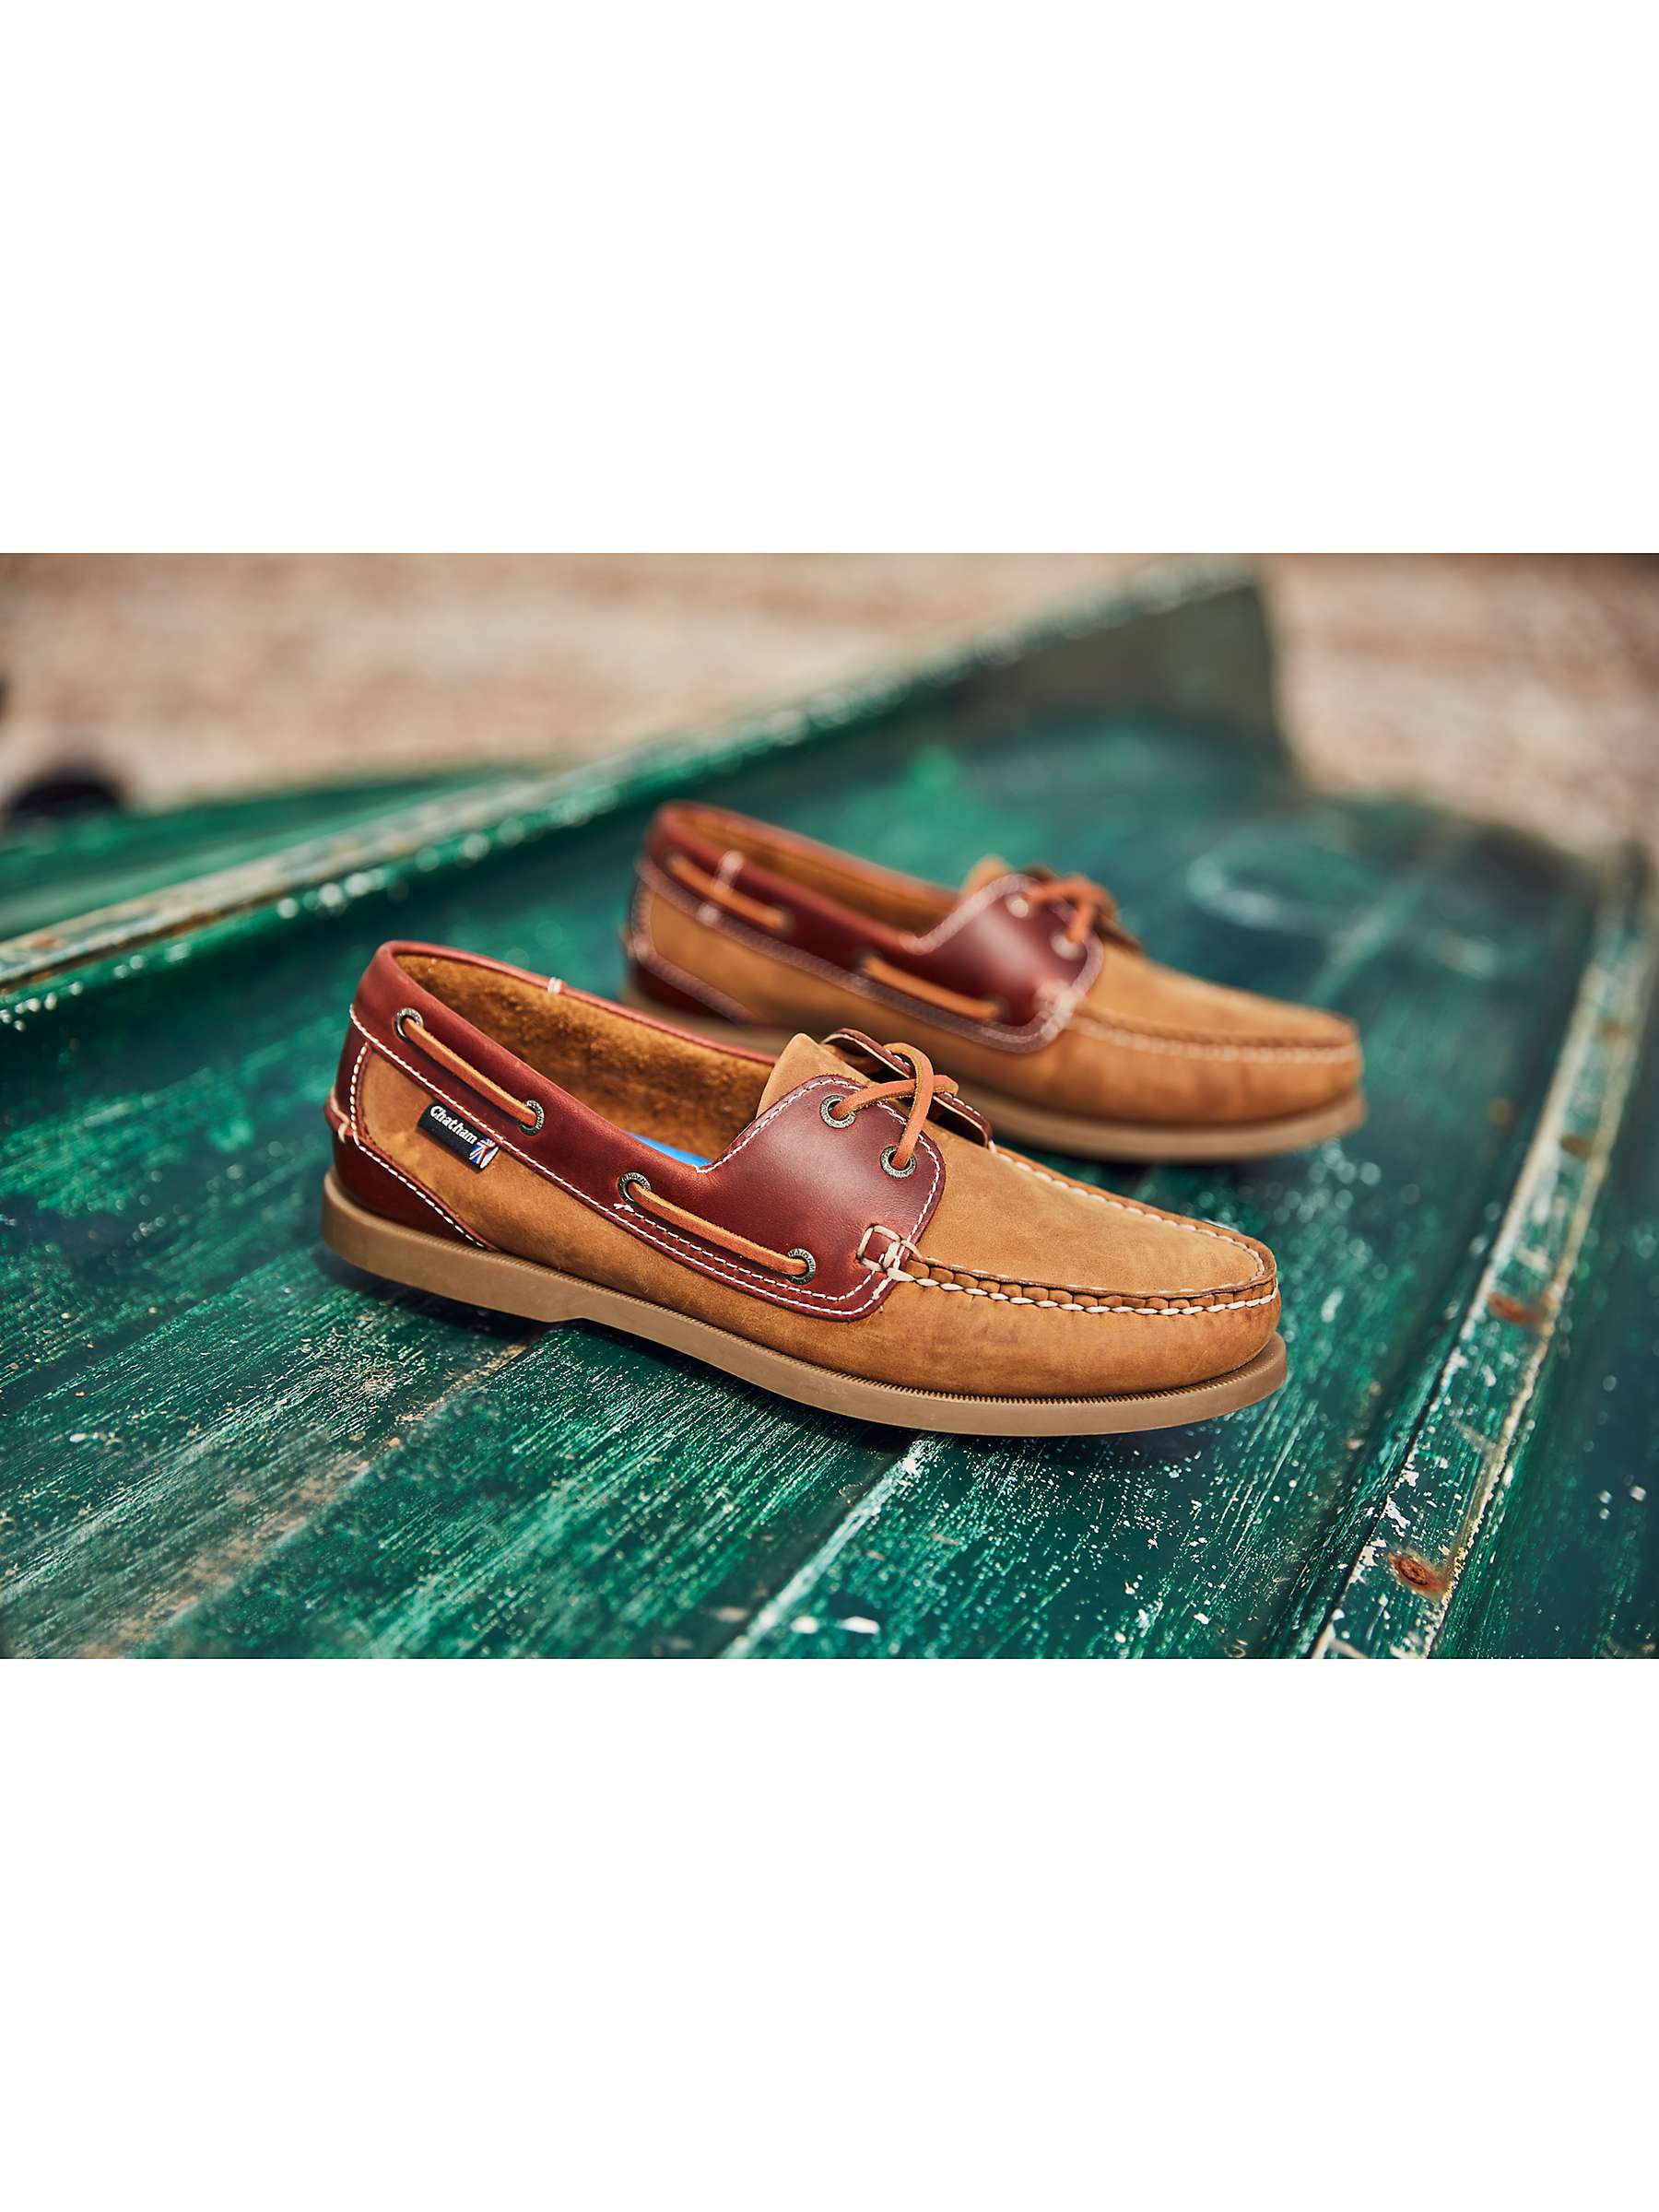 Buy Chatham Bermuda II G2 Leather Boat Shoes, Tan Online at johnlewis.com